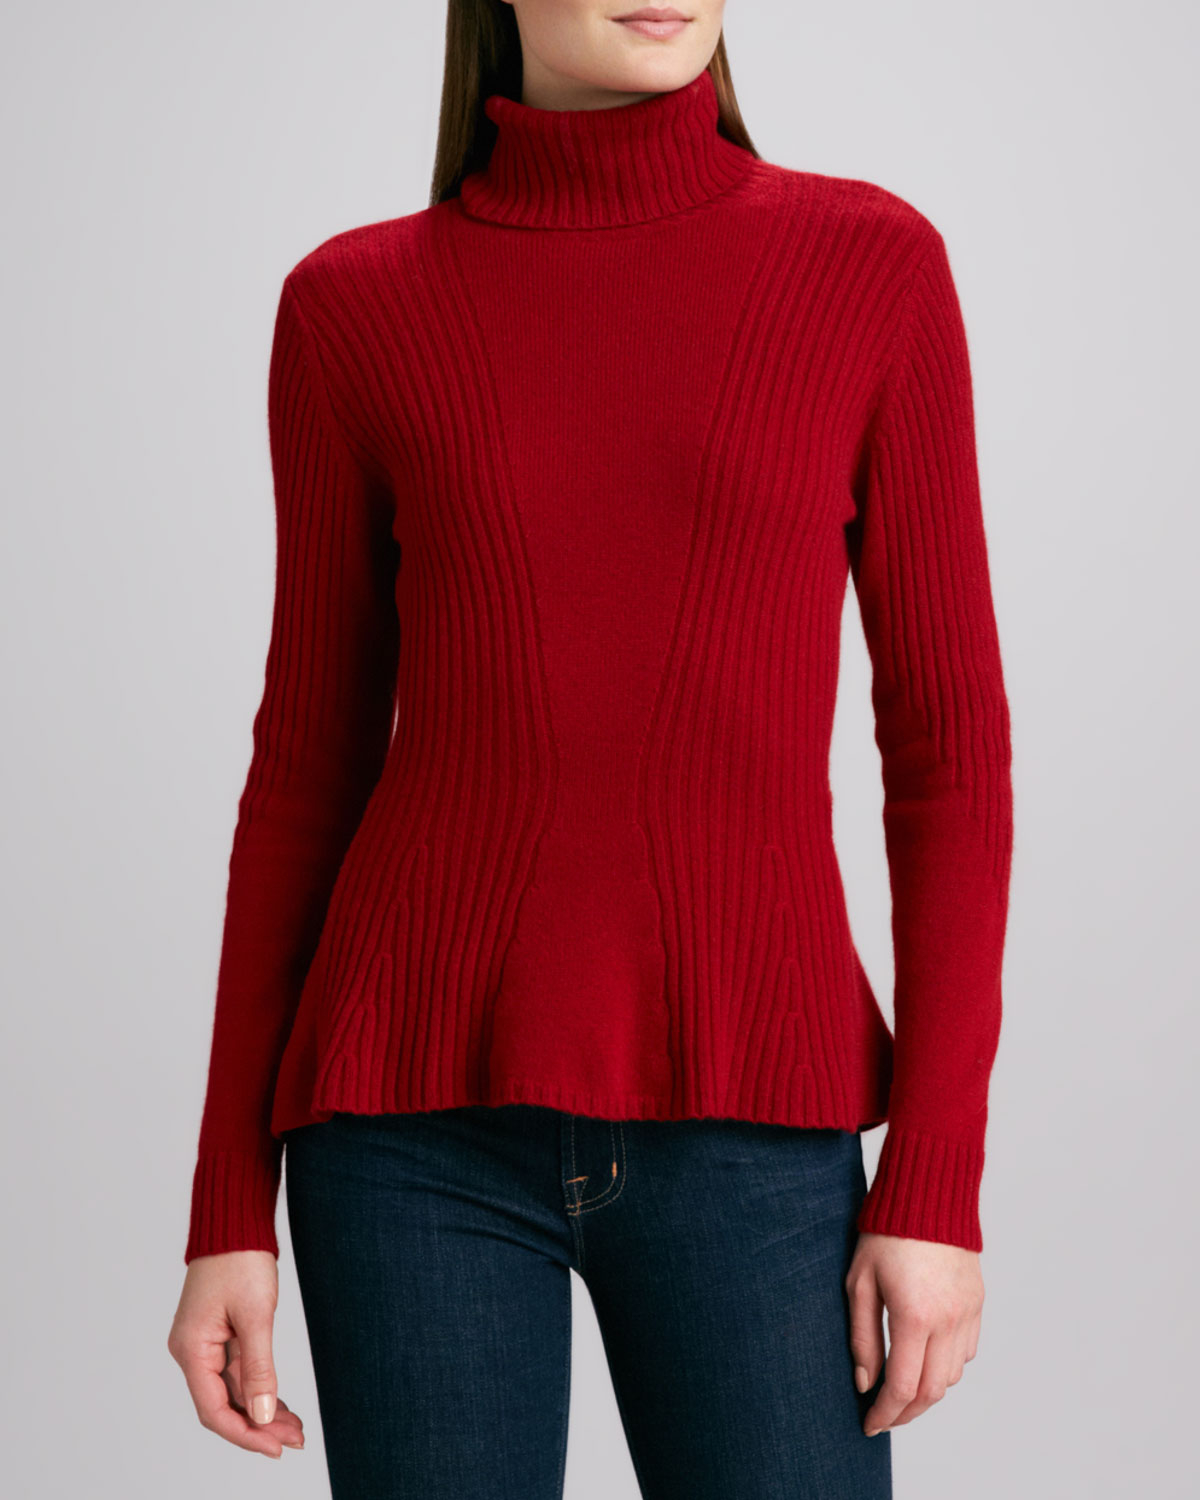 Magaschoni Cashmere Turtleneck Peplum Sweater in Red | Lyst